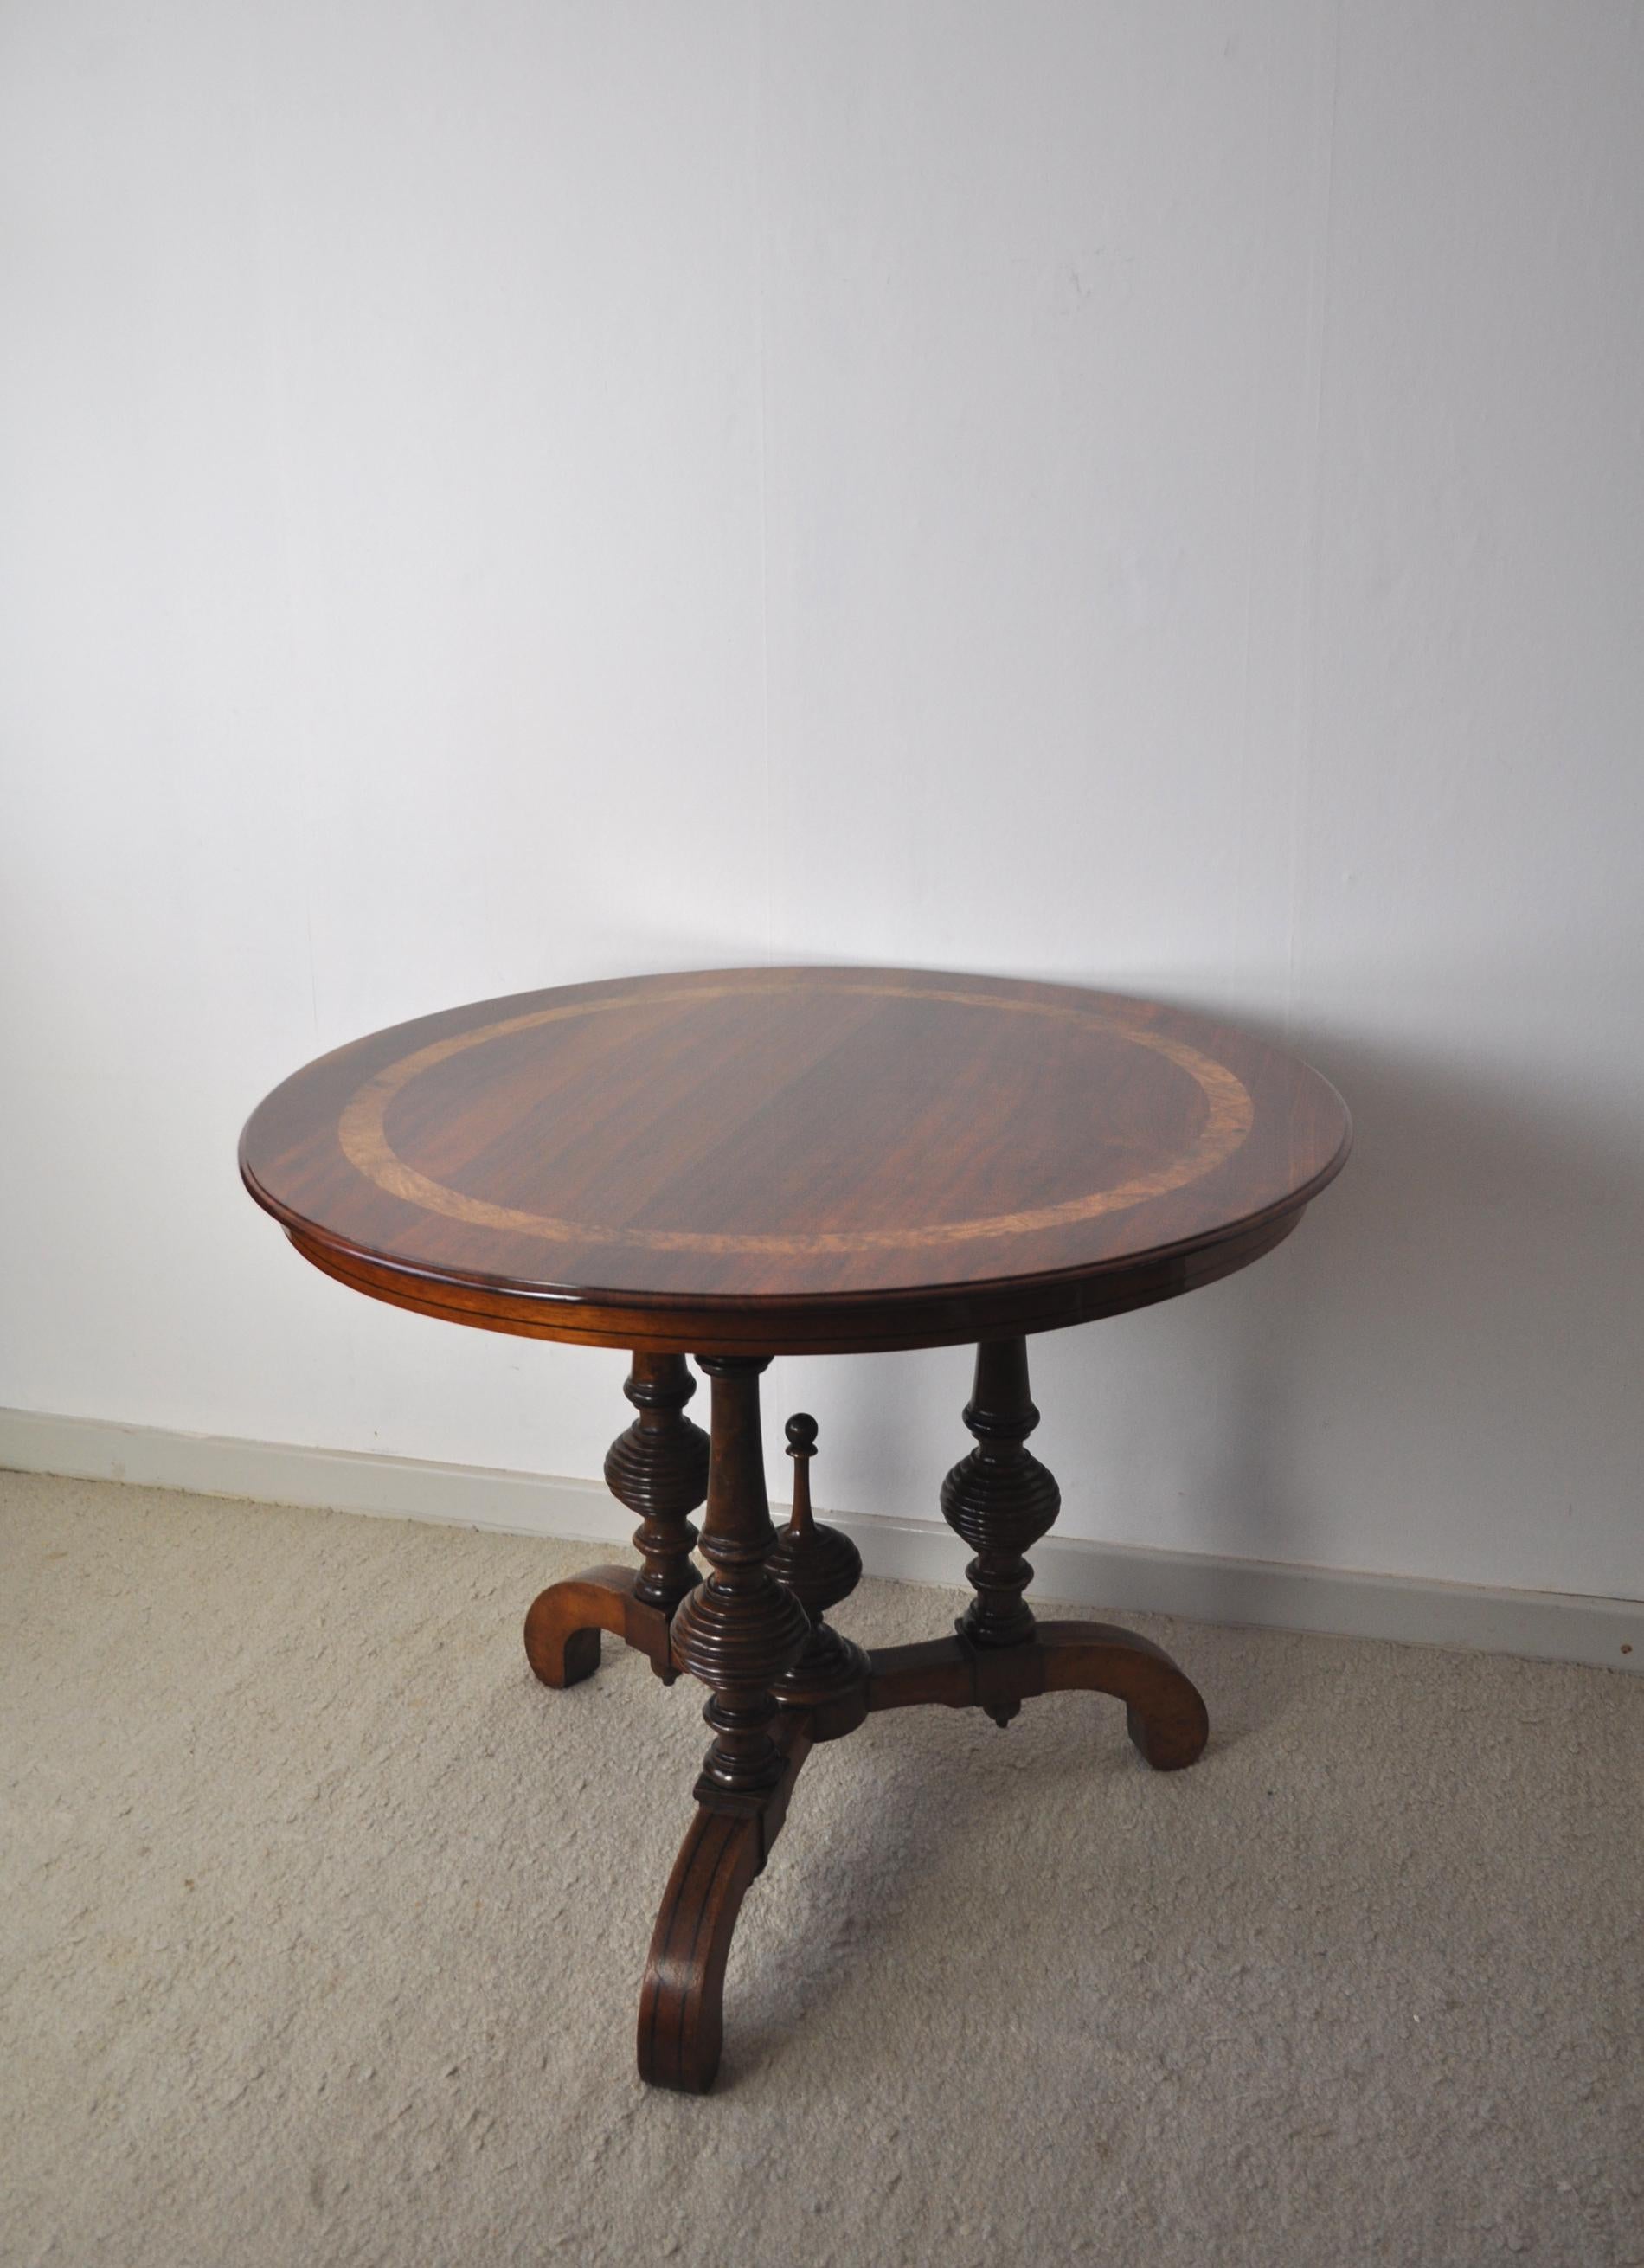 Wonderful Victorian circular mahogany centre table with beautiful band of burr walnut inlays. Ebony stringing on the side of the table. The top rests on three turned supports and three feet with ebony stringing.

The tabletop has been restored and